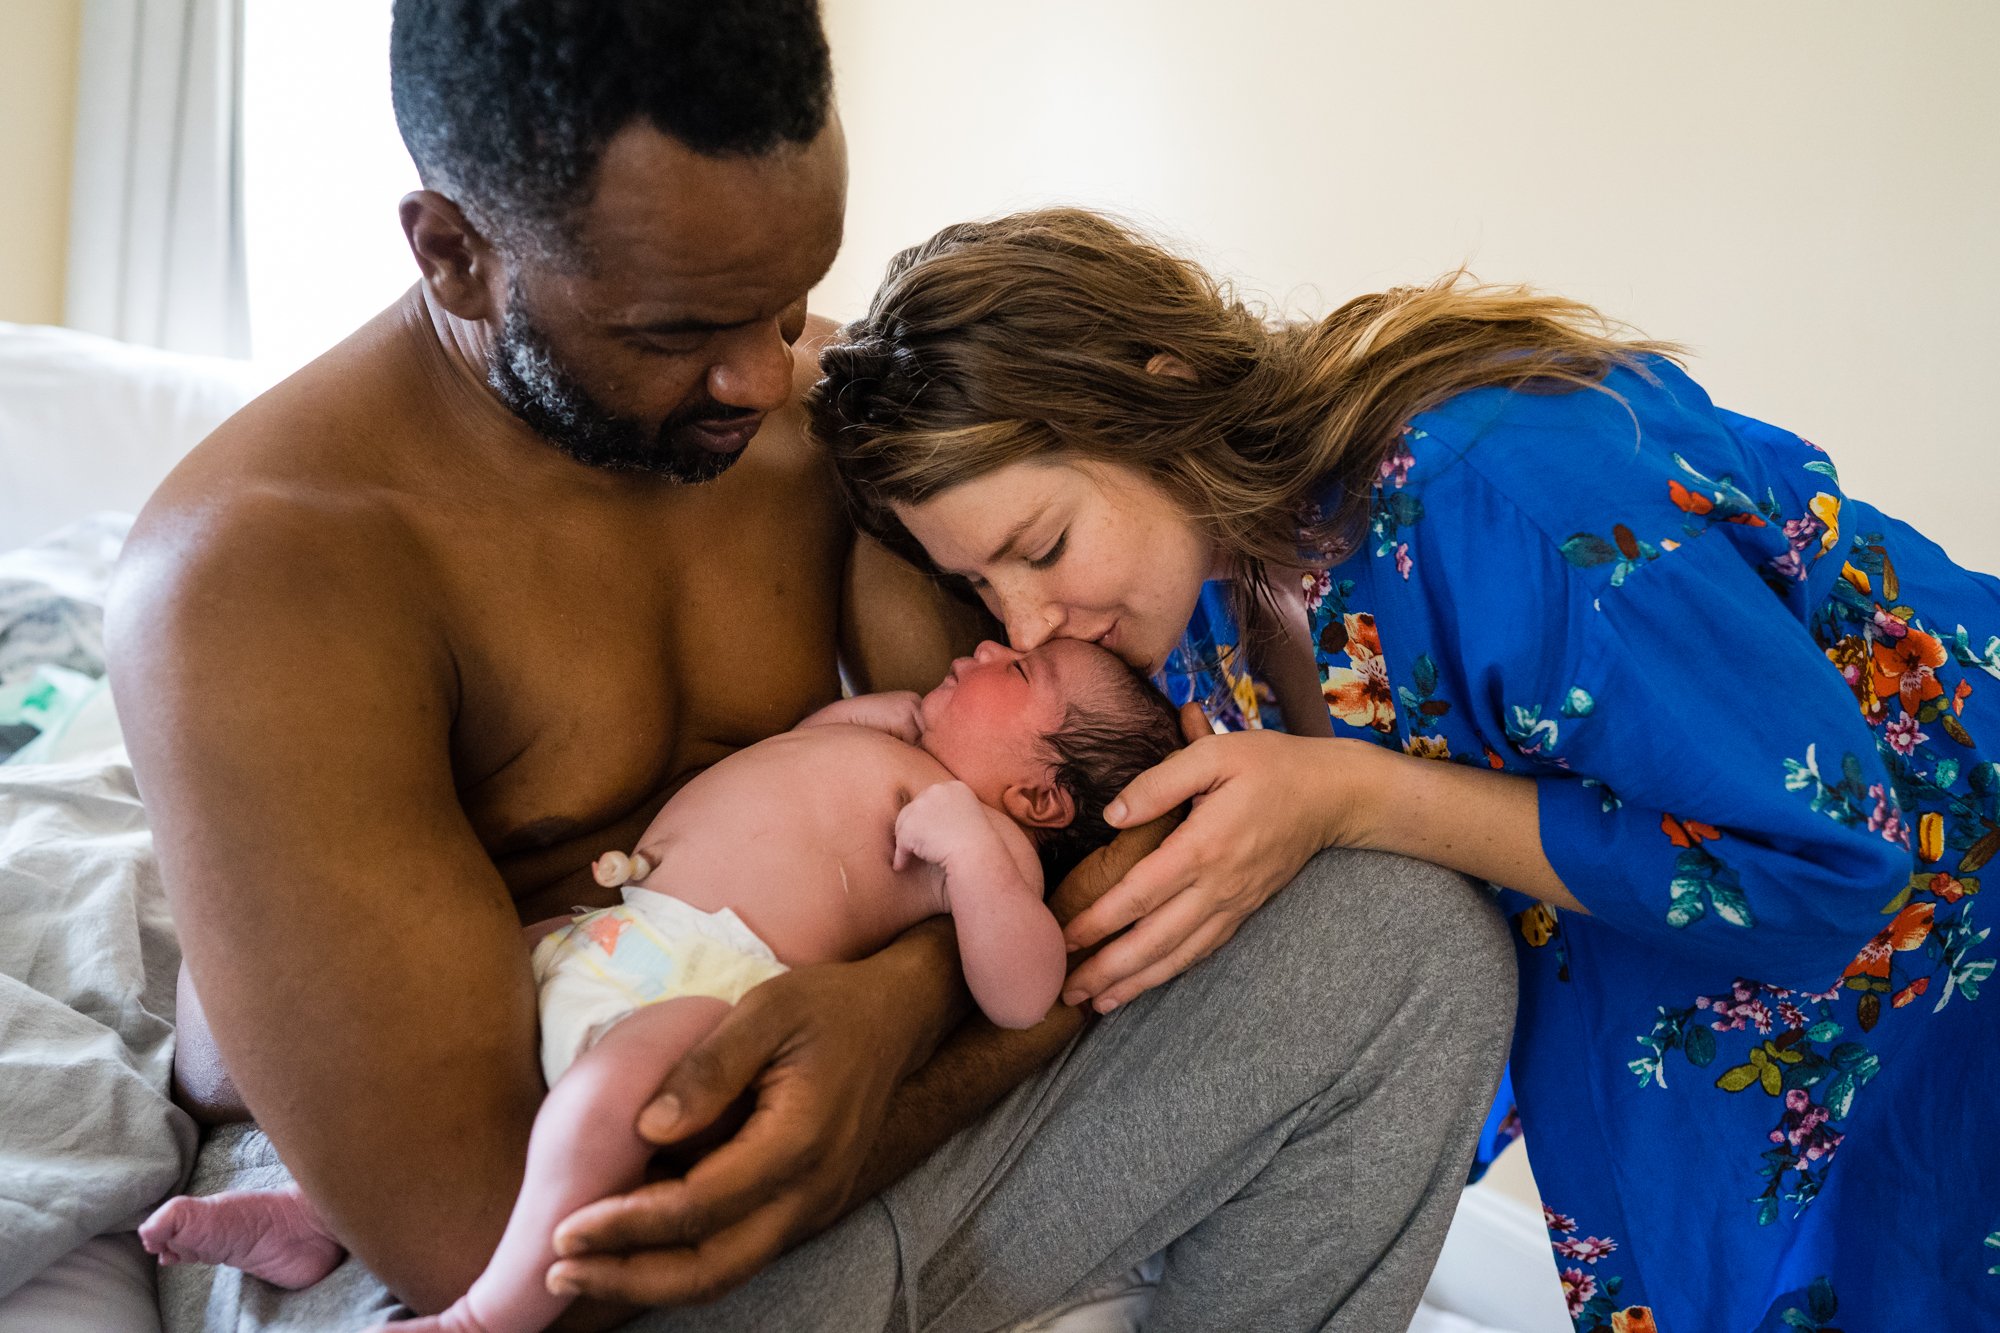 White mother in blue floral robe gently kisses newborn baby on the head while Black father holds him skin to skin, Philadelphia home birth photography